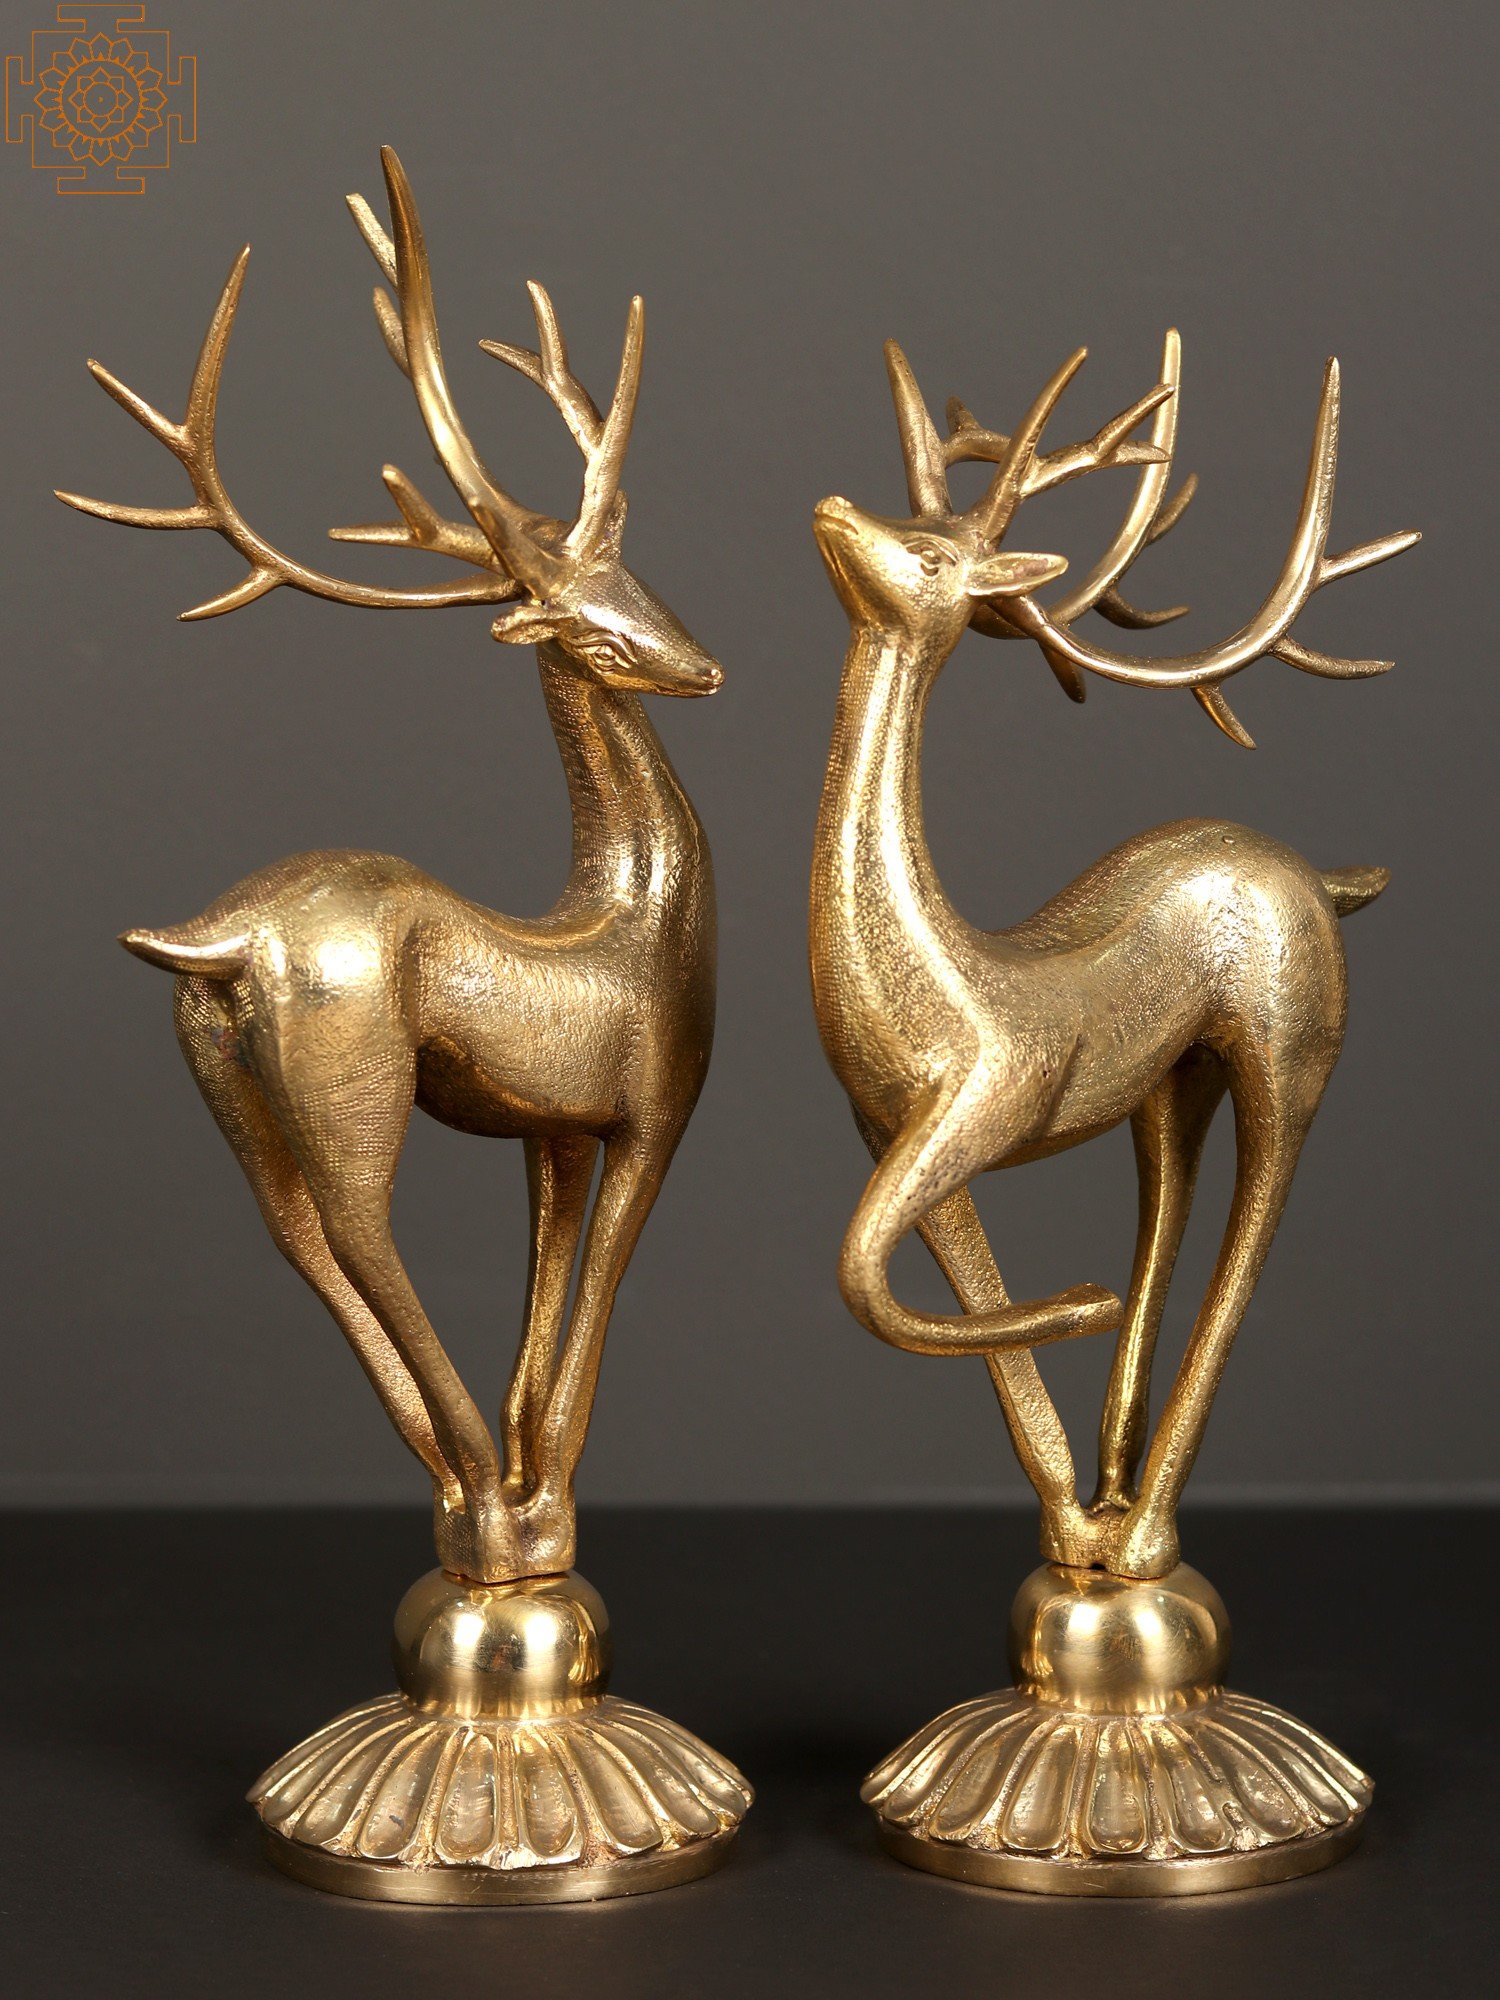 Stunning wholesale brass animal figurines for Decor and Souvenirs